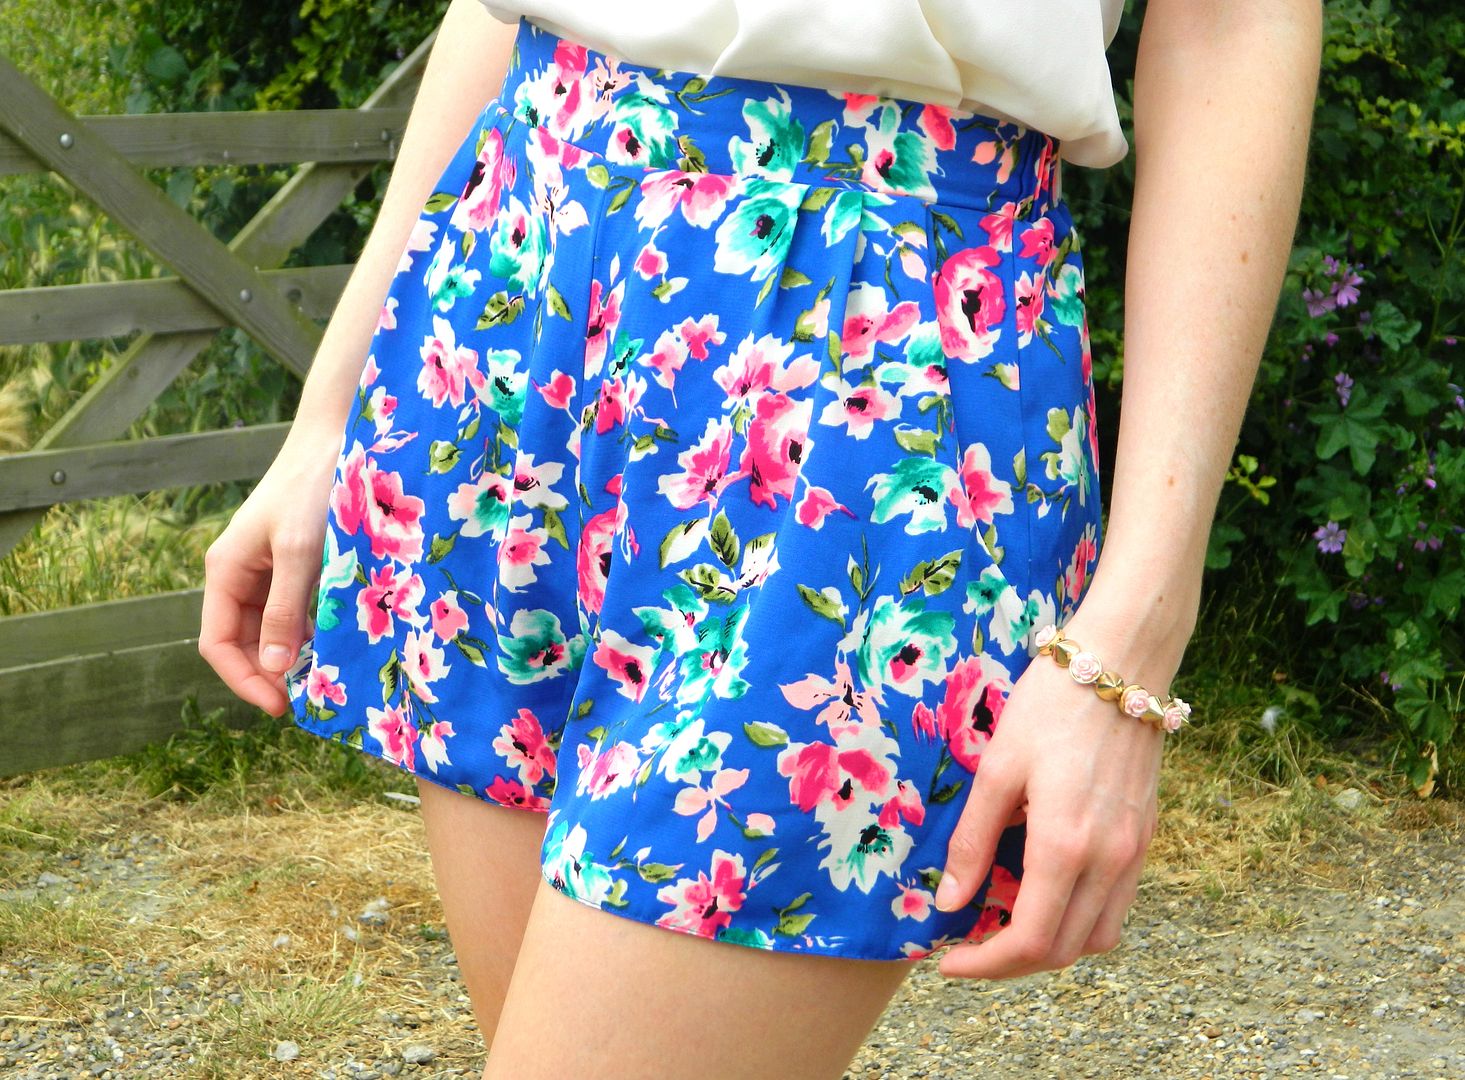 Spring Summer Fashion Floral Prints New Look Pink Blue Floral Shorts Belle-amie UK Beauty Fashion Lifestyle Blog